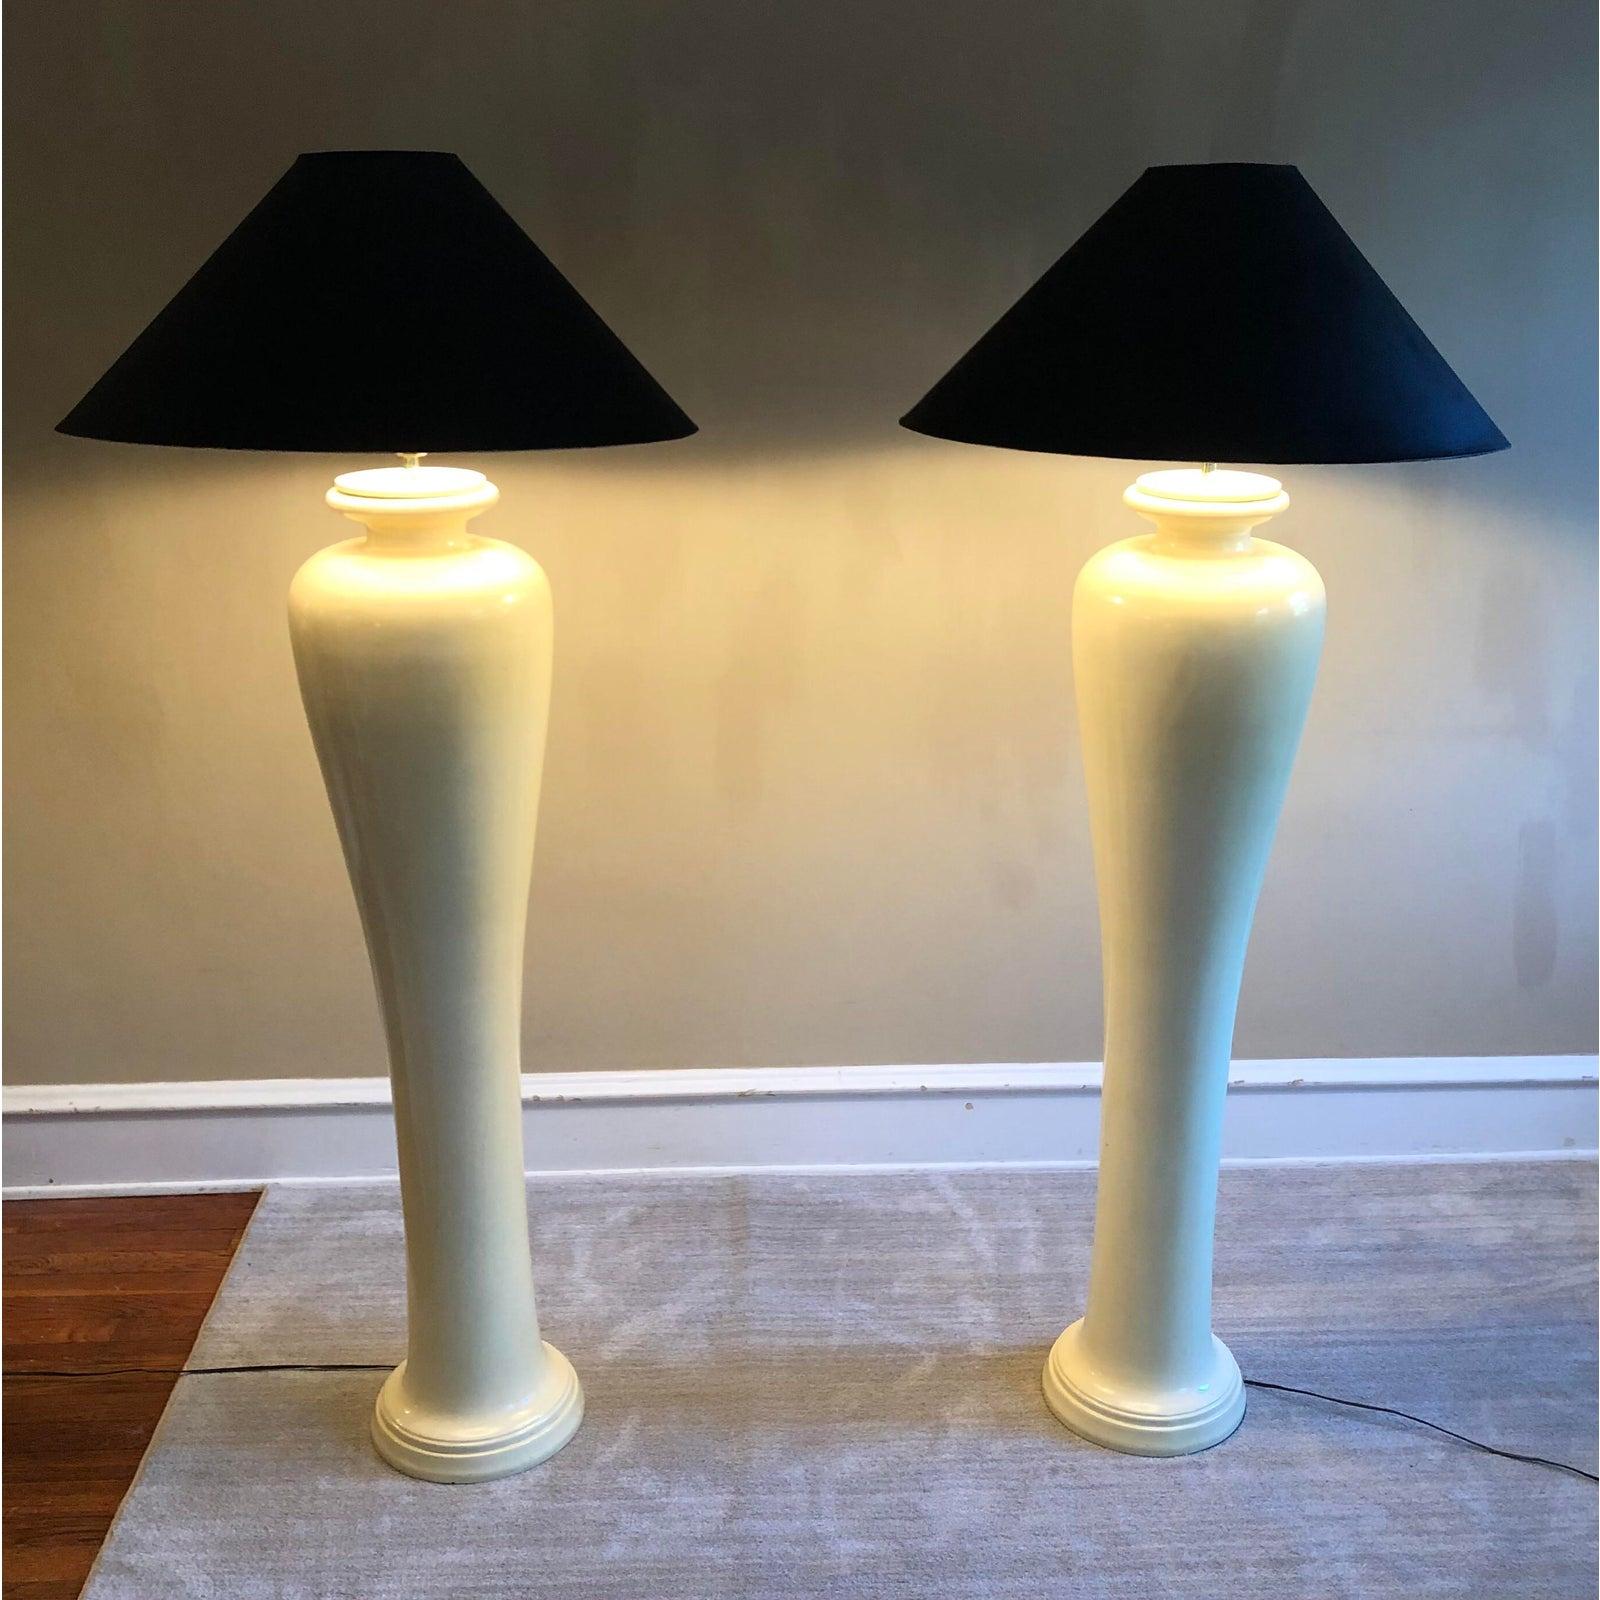 Huge 1980s floor lamps. Lacquered chalkware balustrade bases in a rich cream hue.
  